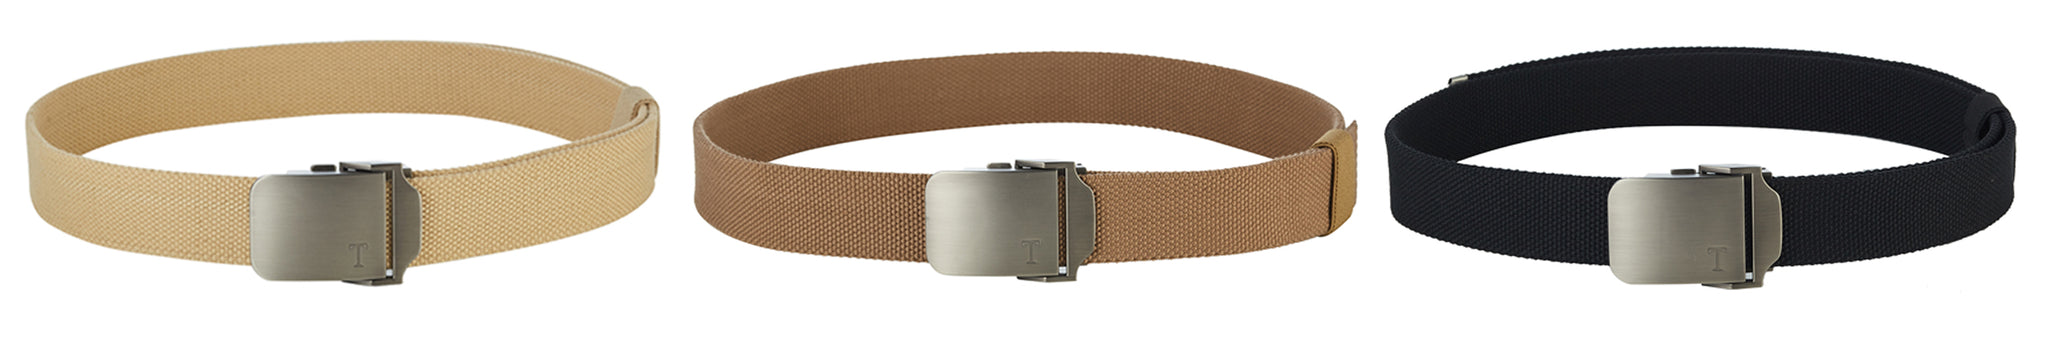 Tonywell Mens Military Belt Thick Canvas Belt Web Belt with Tictical duty Metal Buckle